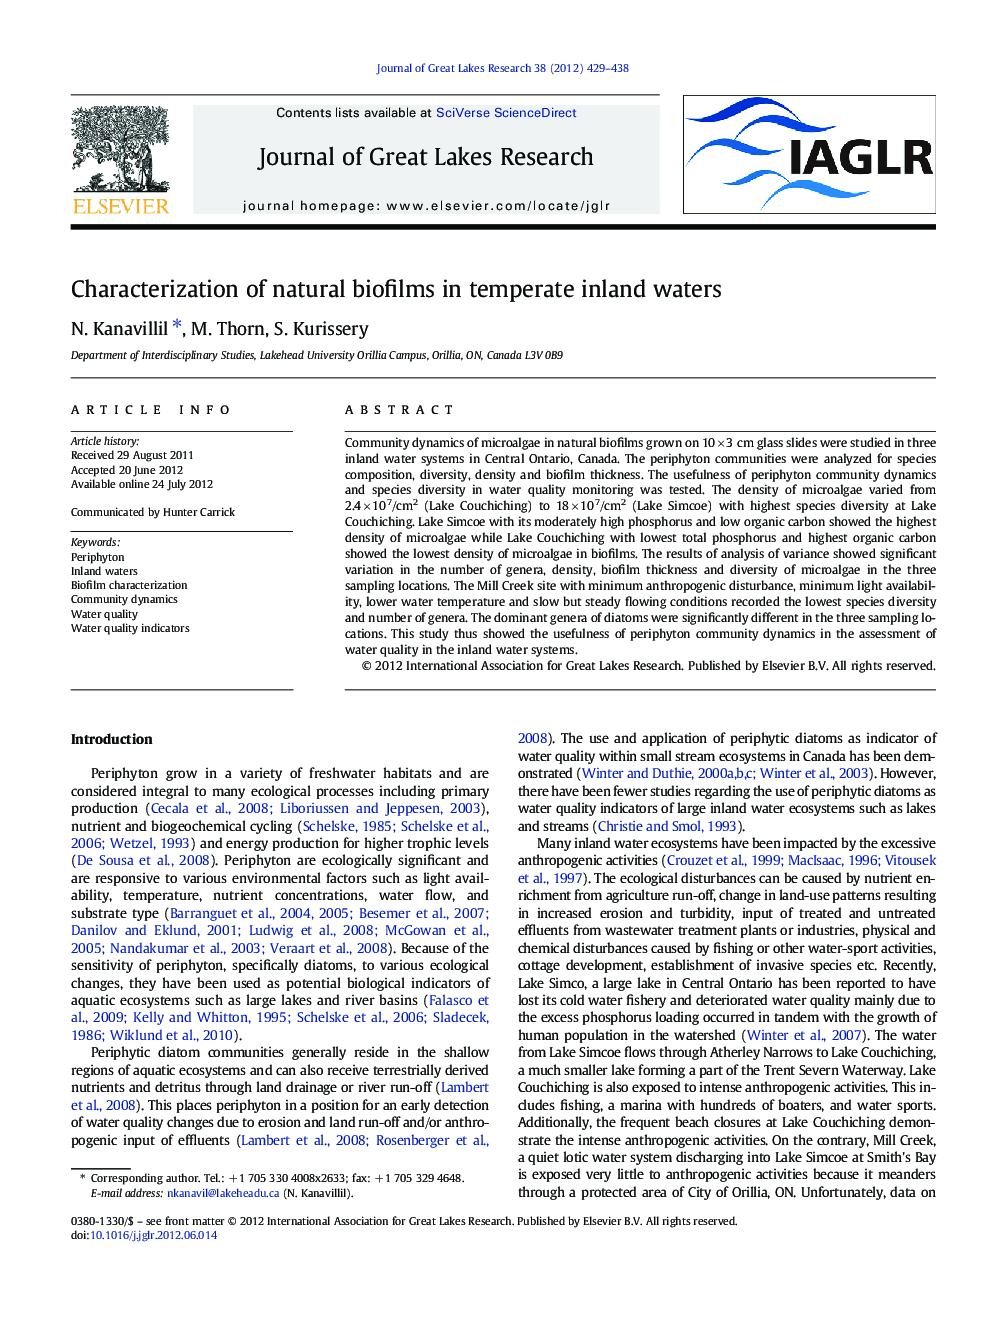 Characterization of natural biofilms in temperate inland waters